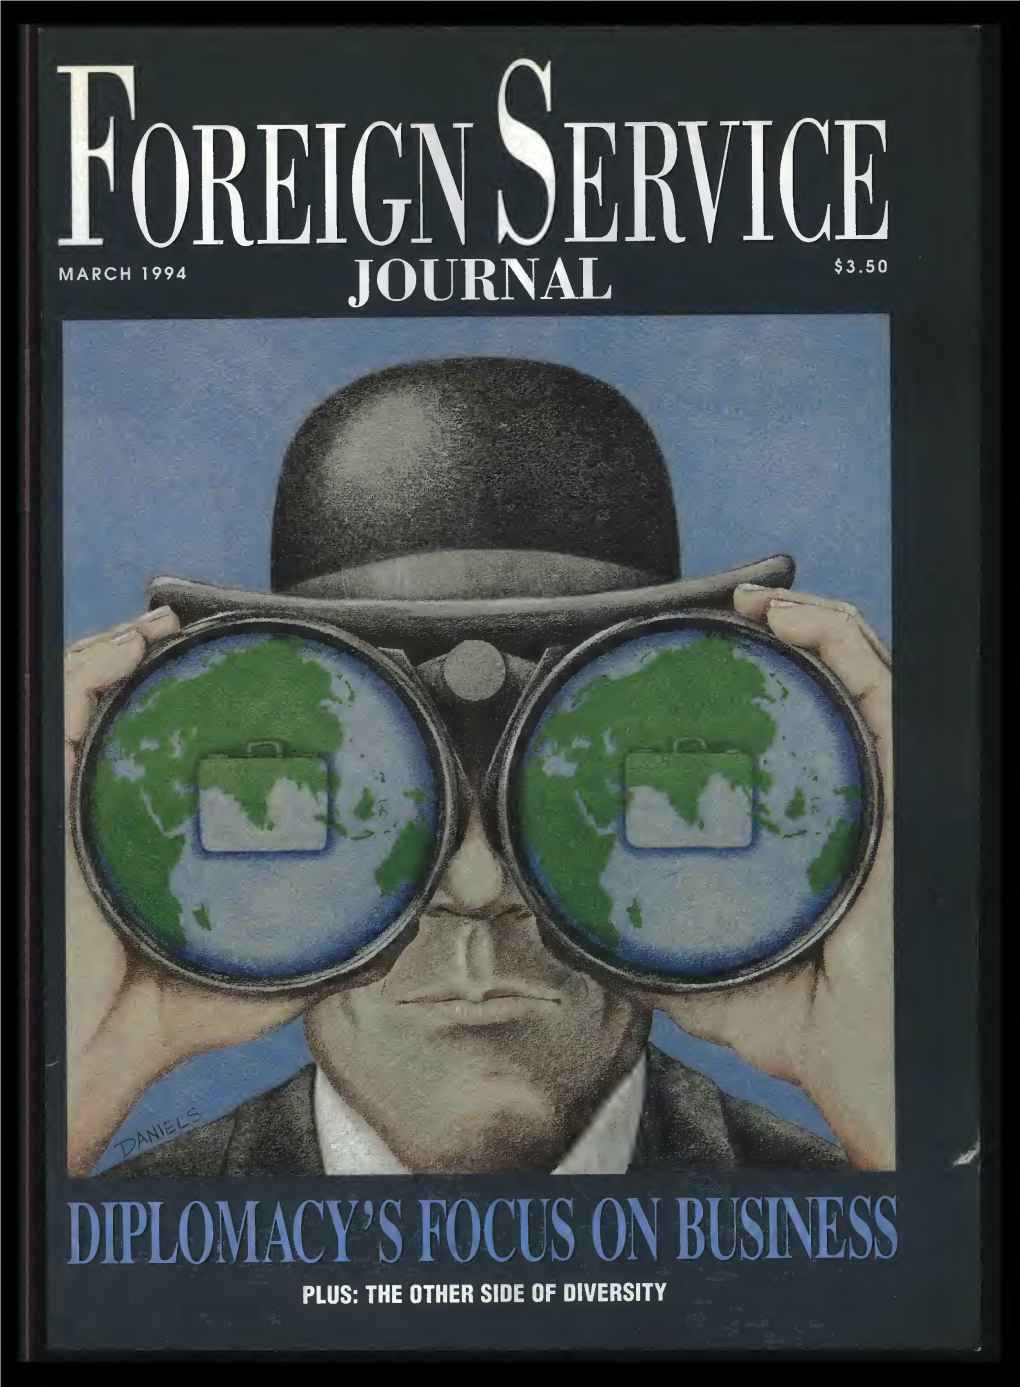 The Foreign Service Journal, March 1994